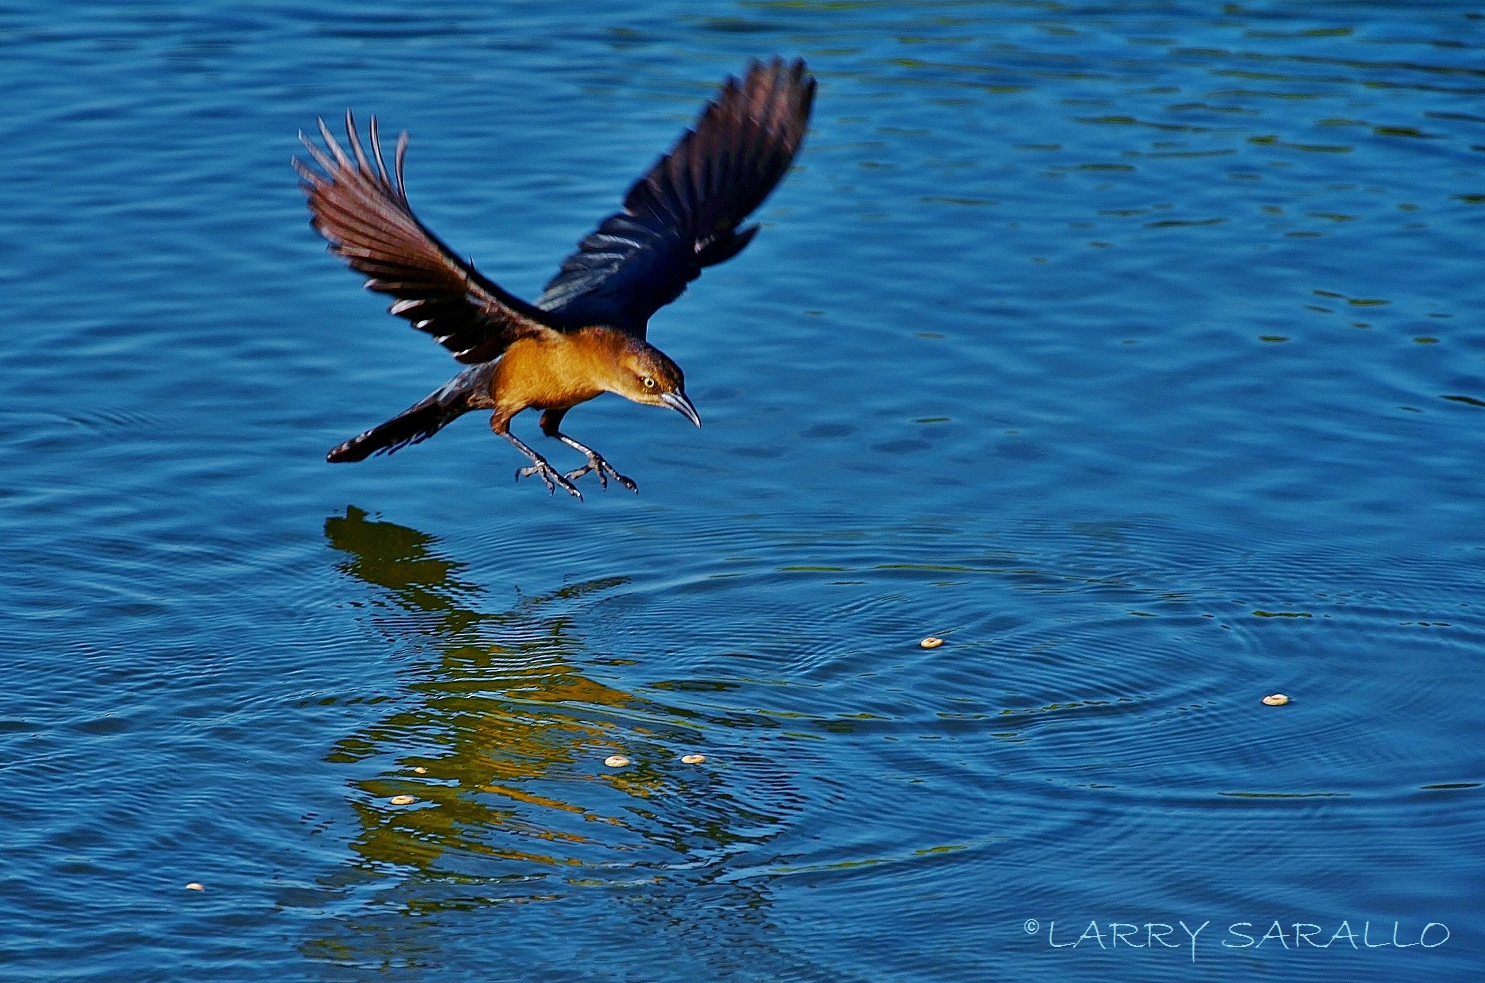 Little brown bird swooping down to pluck a fish out of the lake but all he gets is a Cheerio.